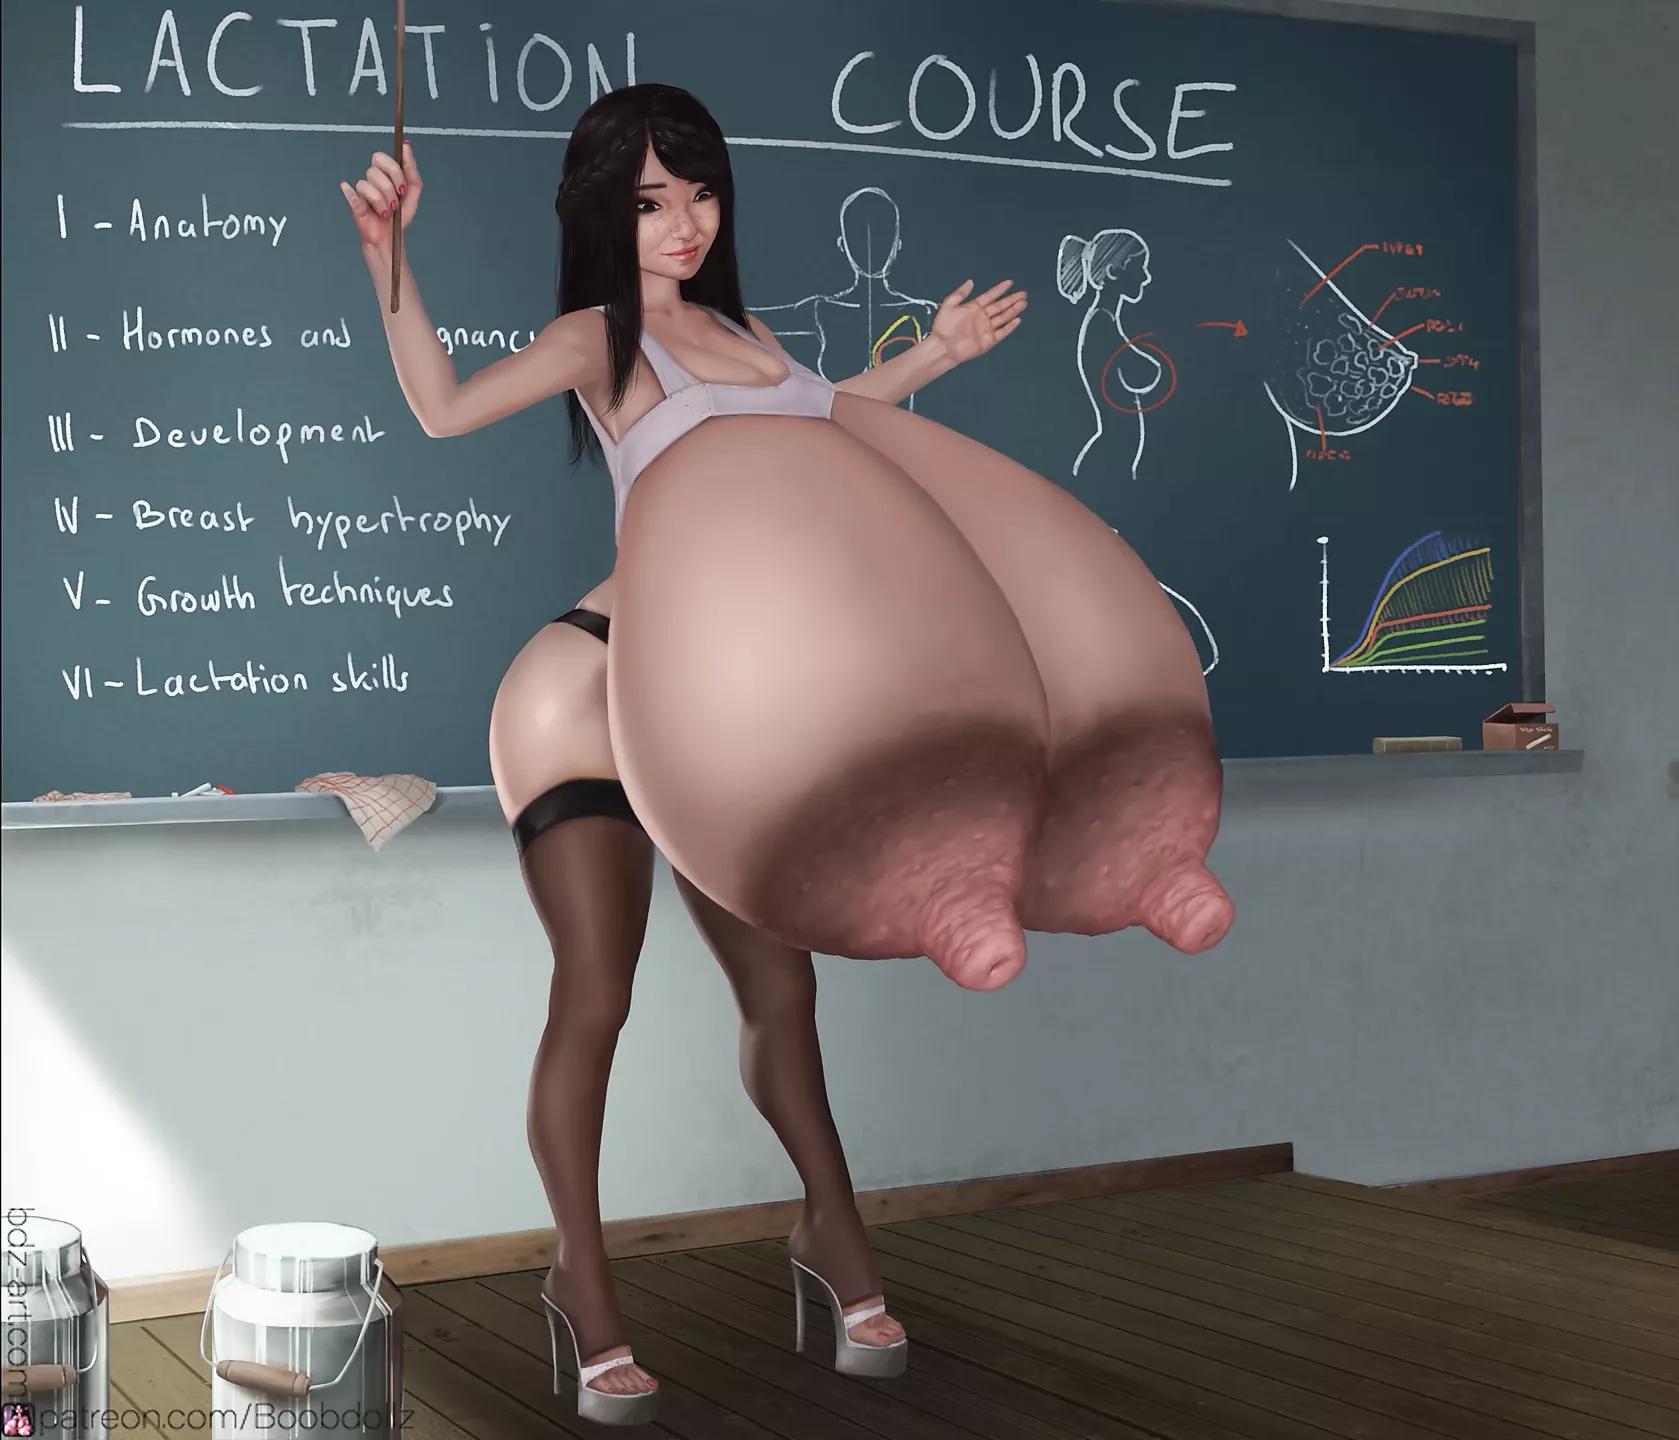 Lactation Course Breast Expansion watch online or download pic